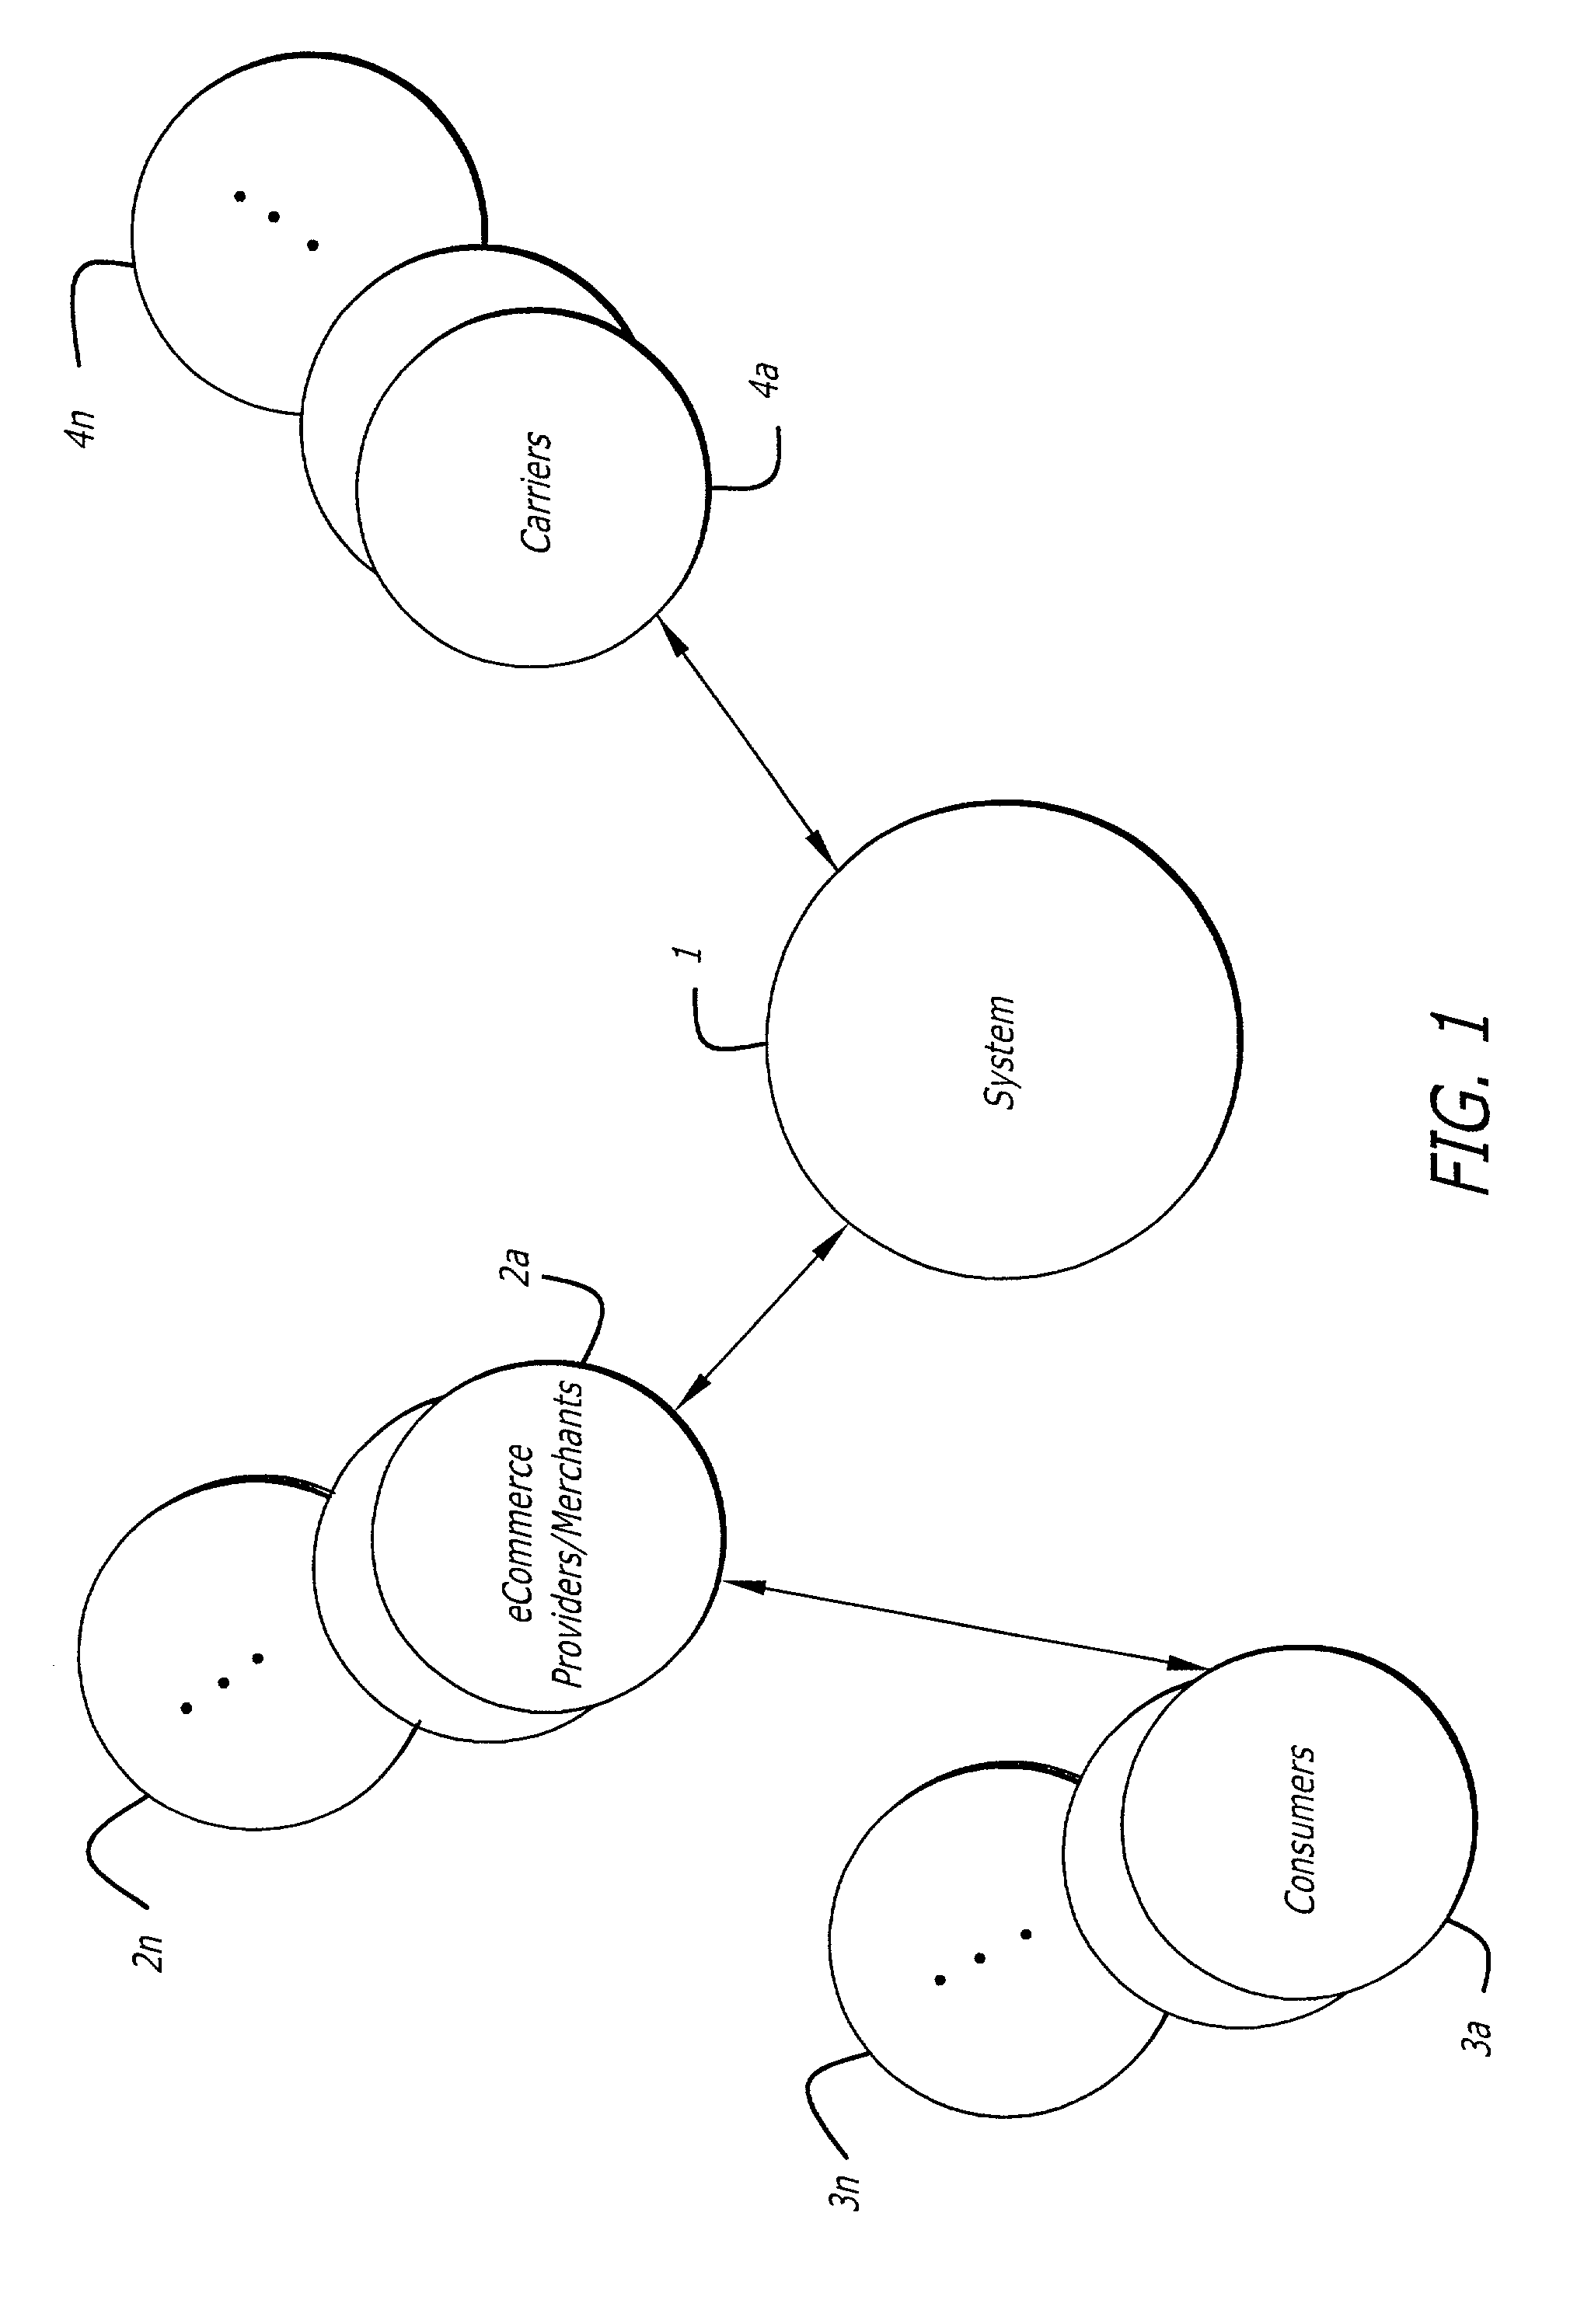 Apparatus, systems and methods for online, multi-parcel, multi-carrier, multi-service parcel returns shipping management